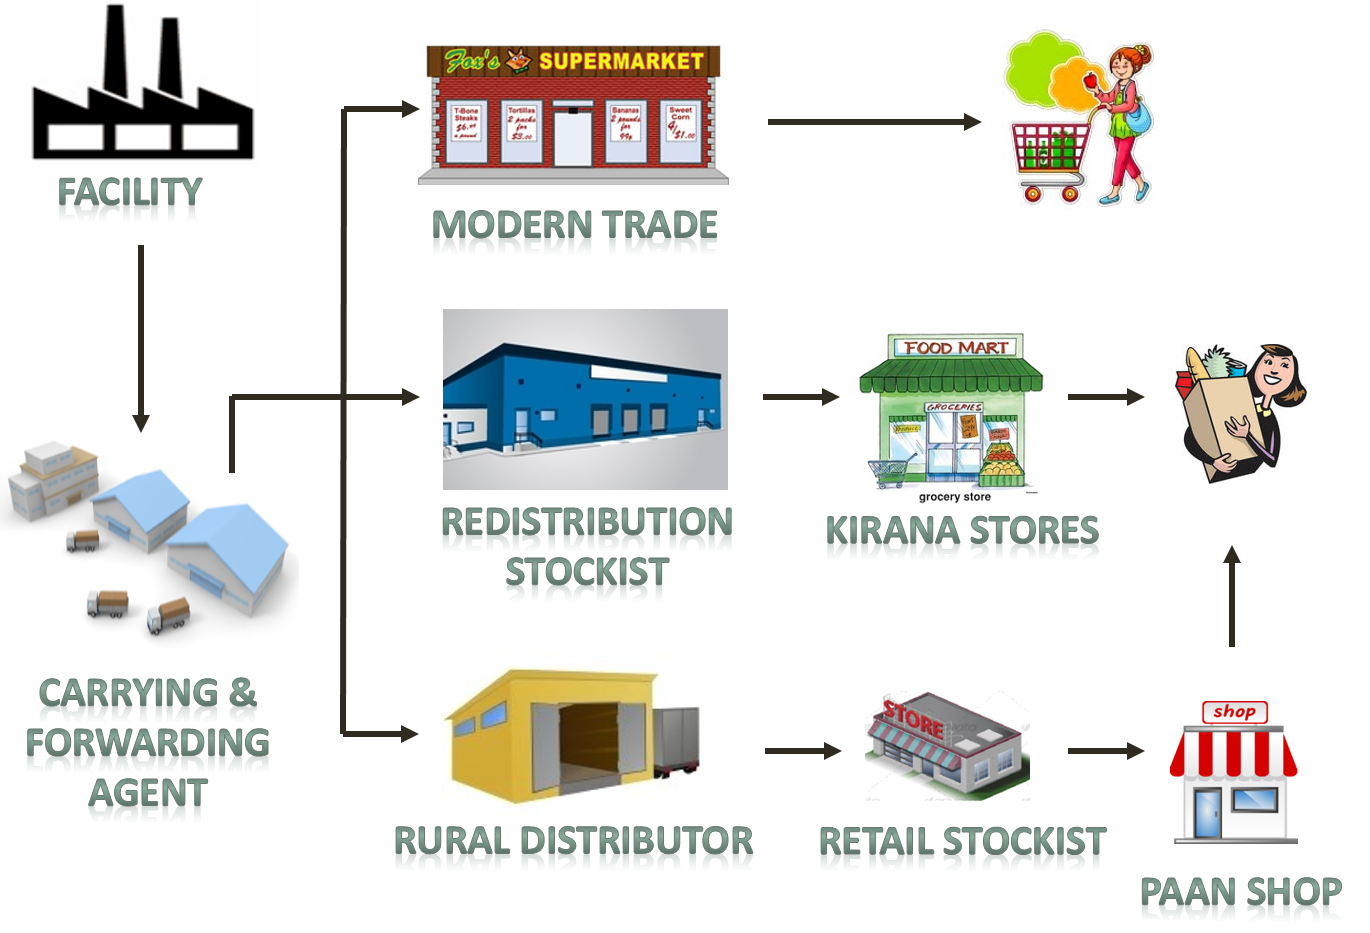 Supply Chain Model in FMCG sector